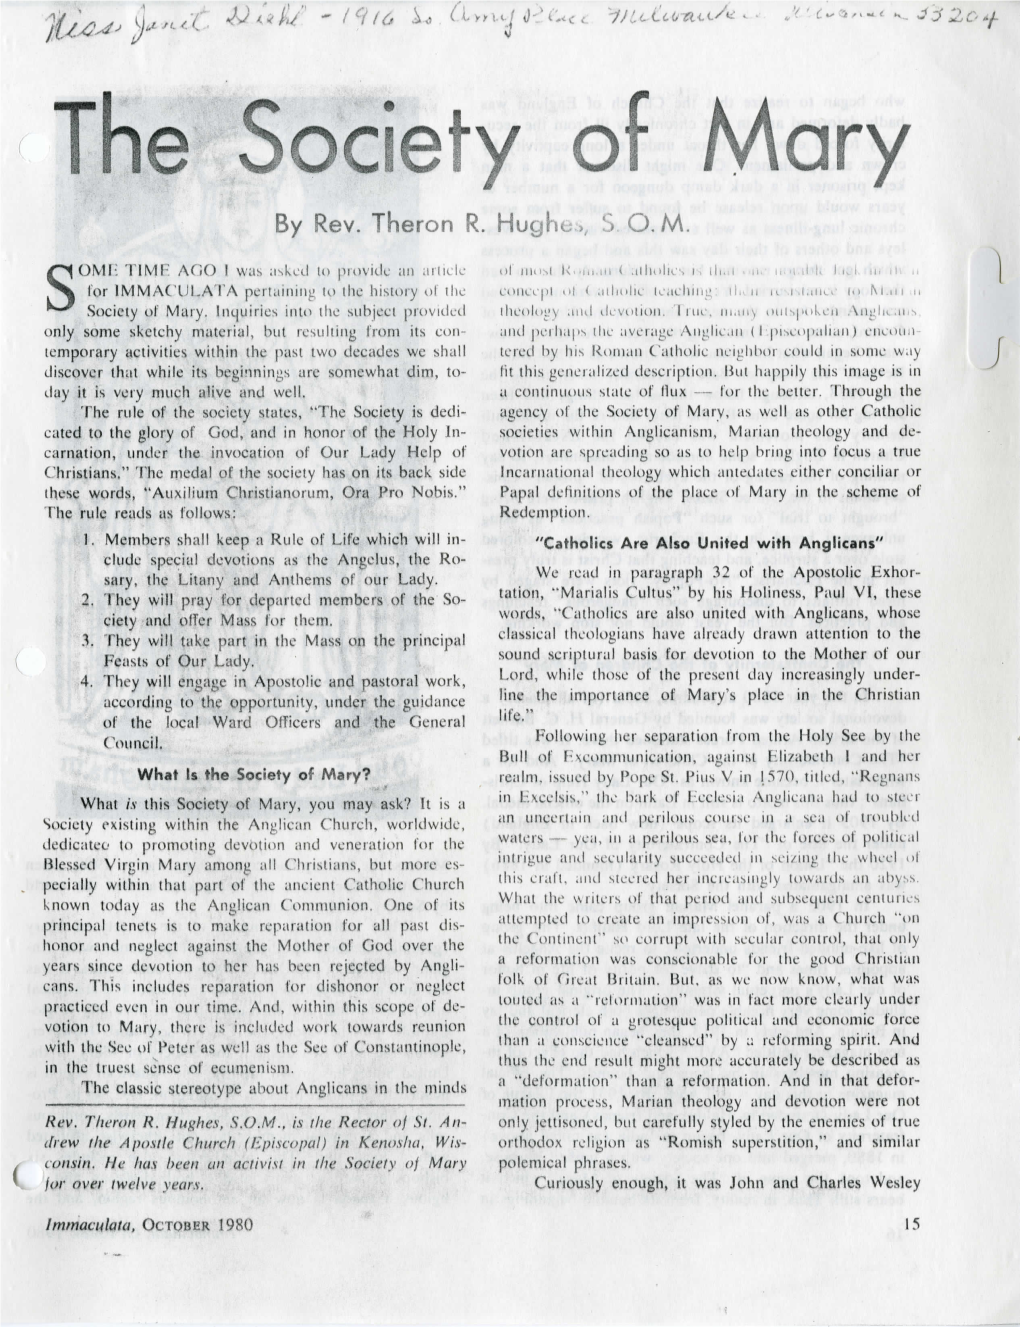 The Society of Mary by Rev